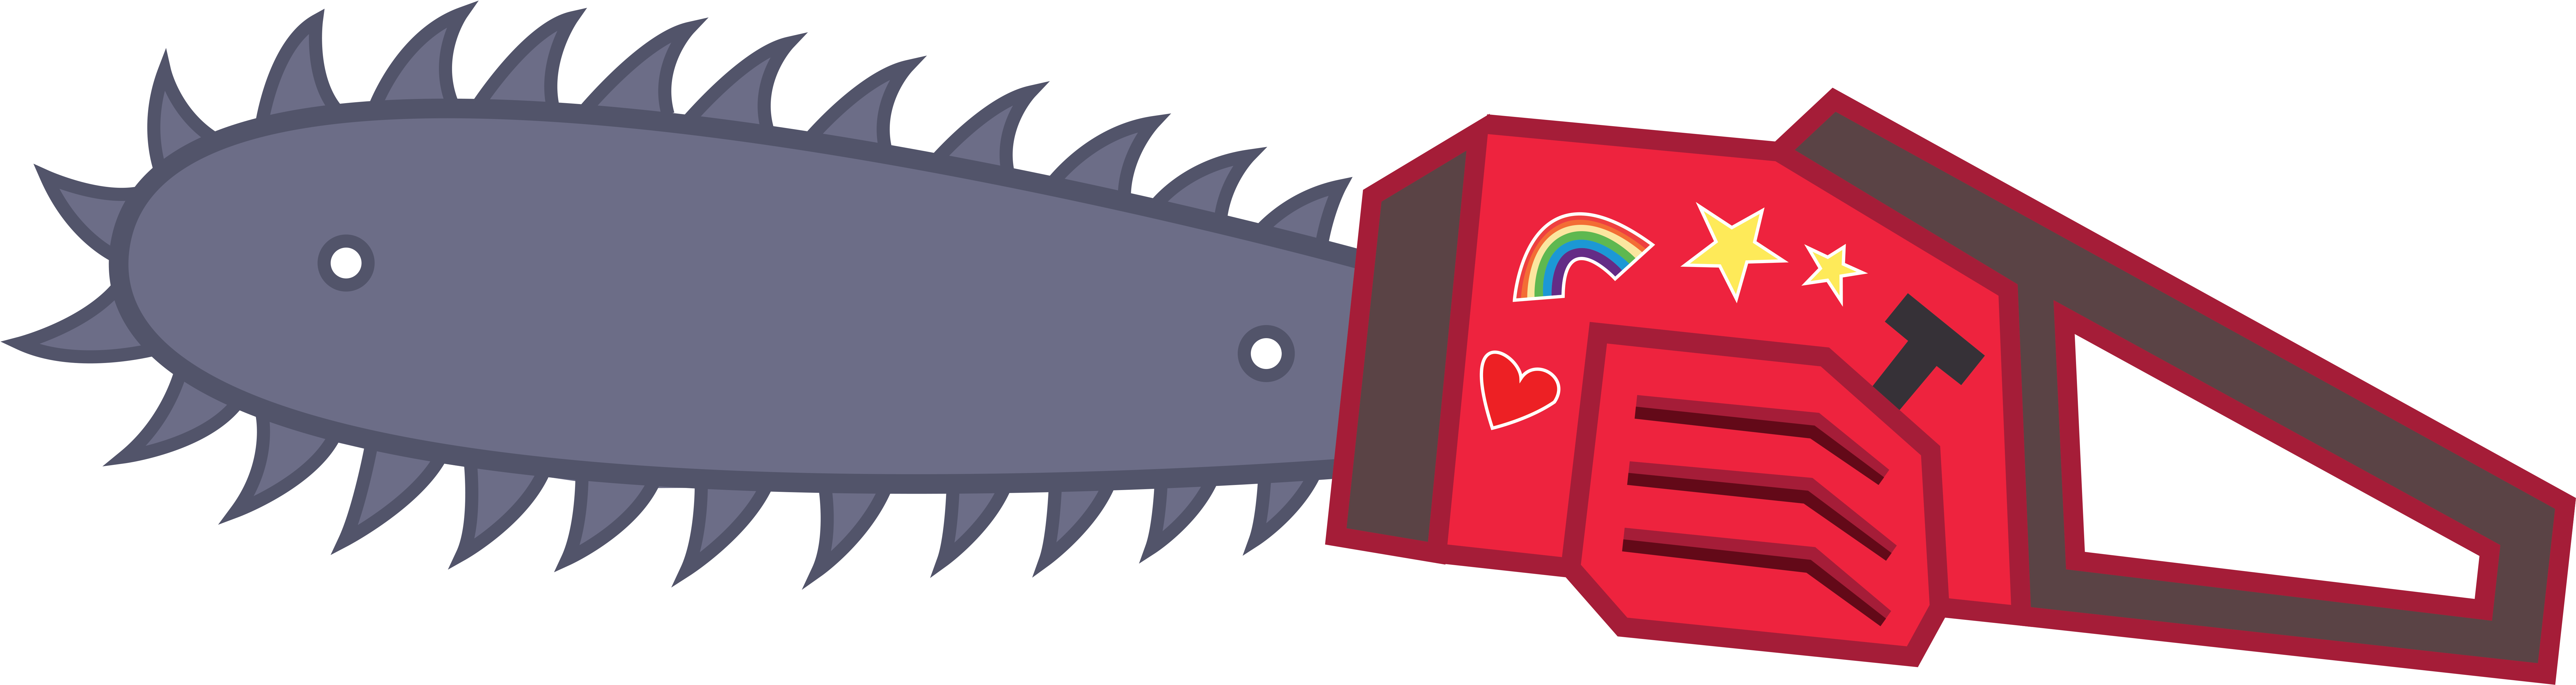 The Chainsaw From Cupcakes Hd By Th3anim8er On Clipart - Mlp Chainsaw Cutie Mark (8789x3000)